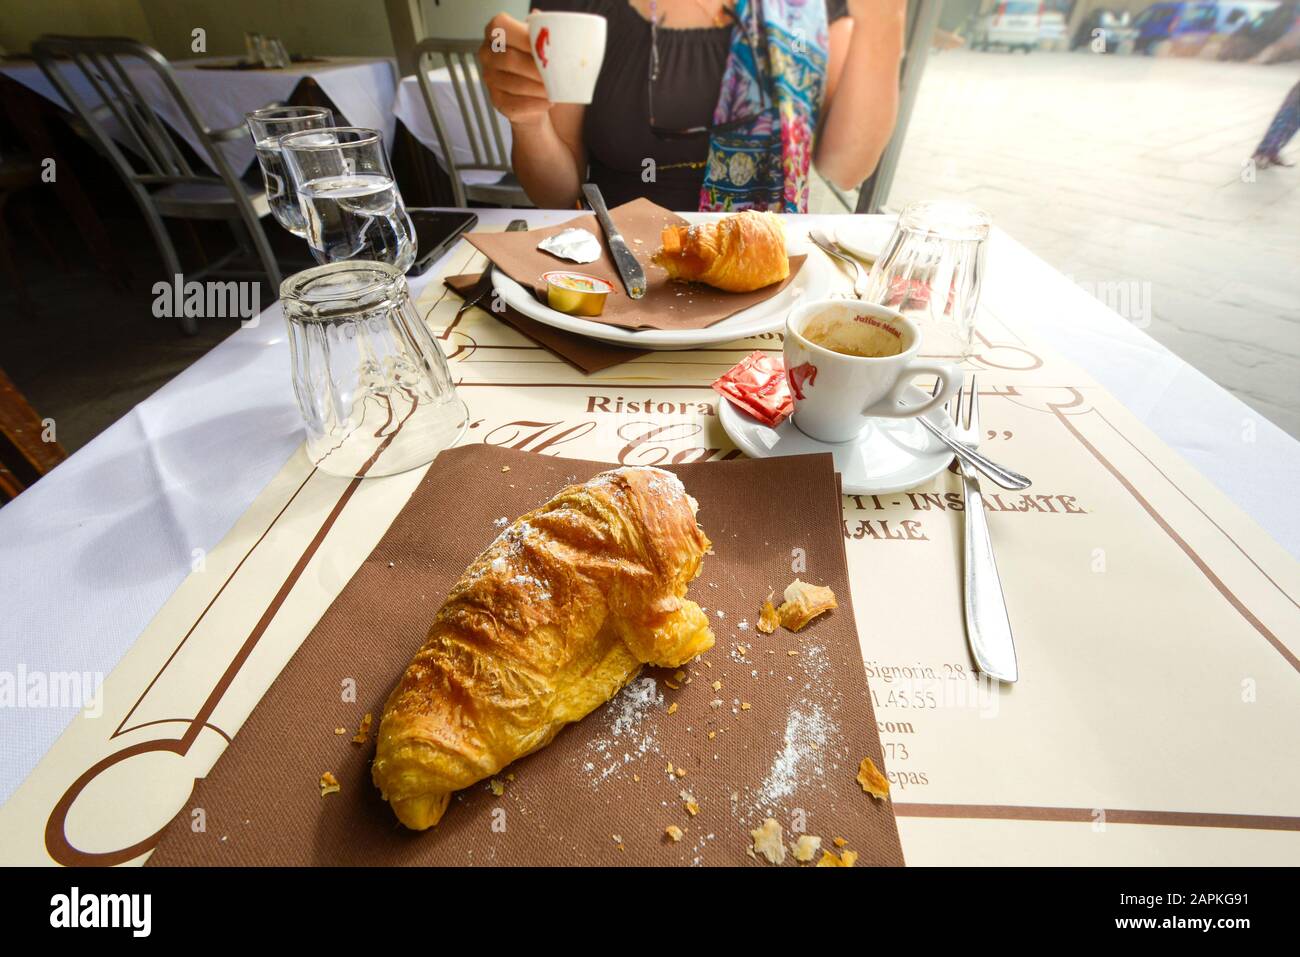 A half eaten croissant and breakfast at a sidewalk cafe as a couple enjoy breakfast in the Tuscan city of Florence, Italy Stock Photo